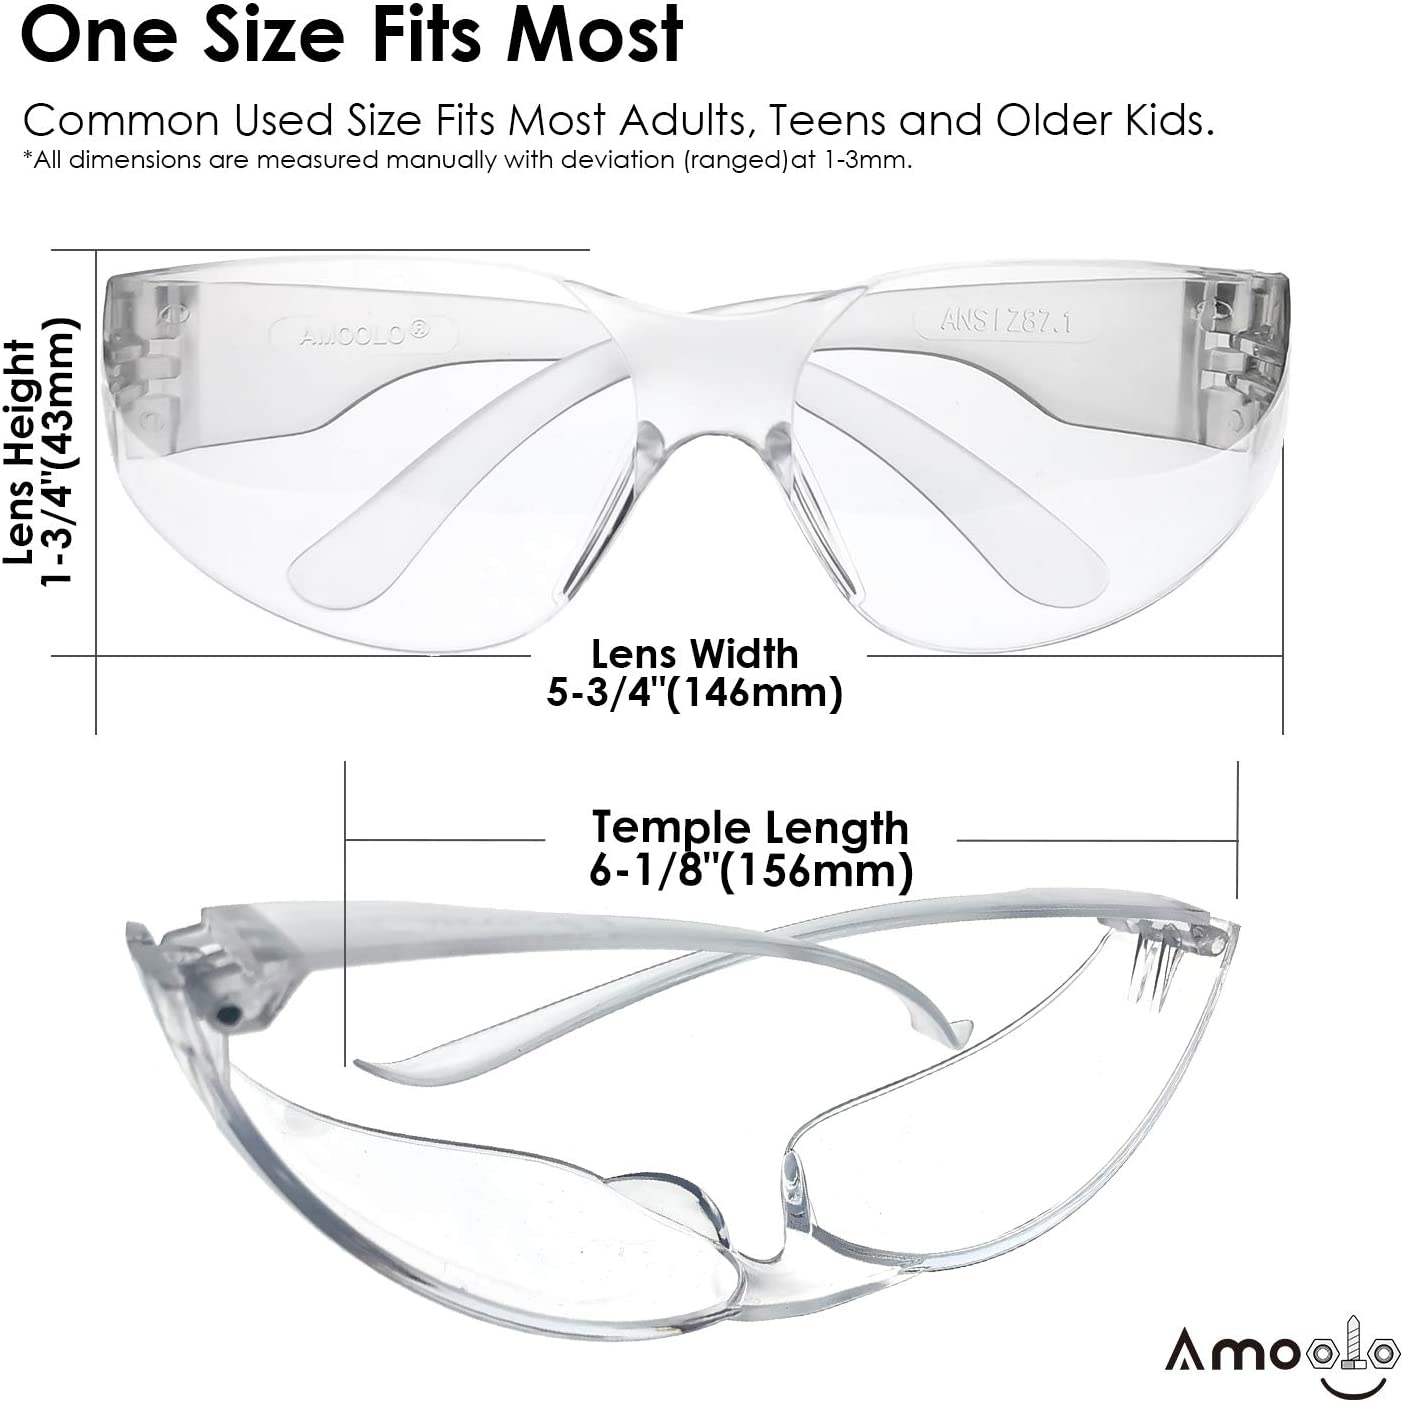 24/48 Workwear Safety Glasses, Lightweight for Day-long Wearing